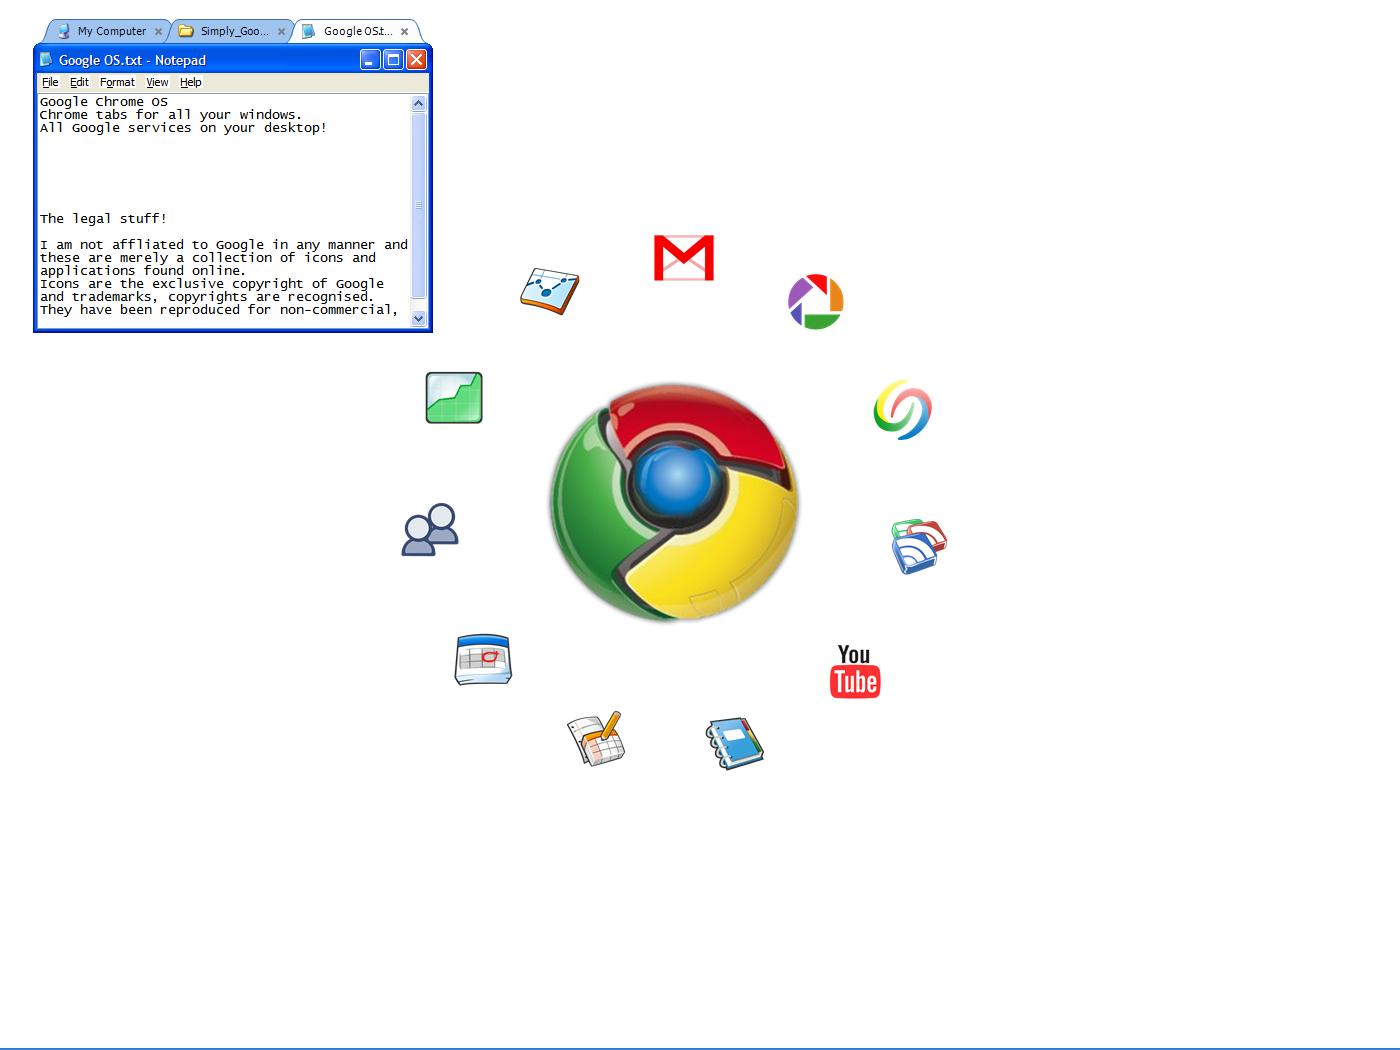 Google Chrome Os Is A Great Wallpaper For Your Puter Desktop And